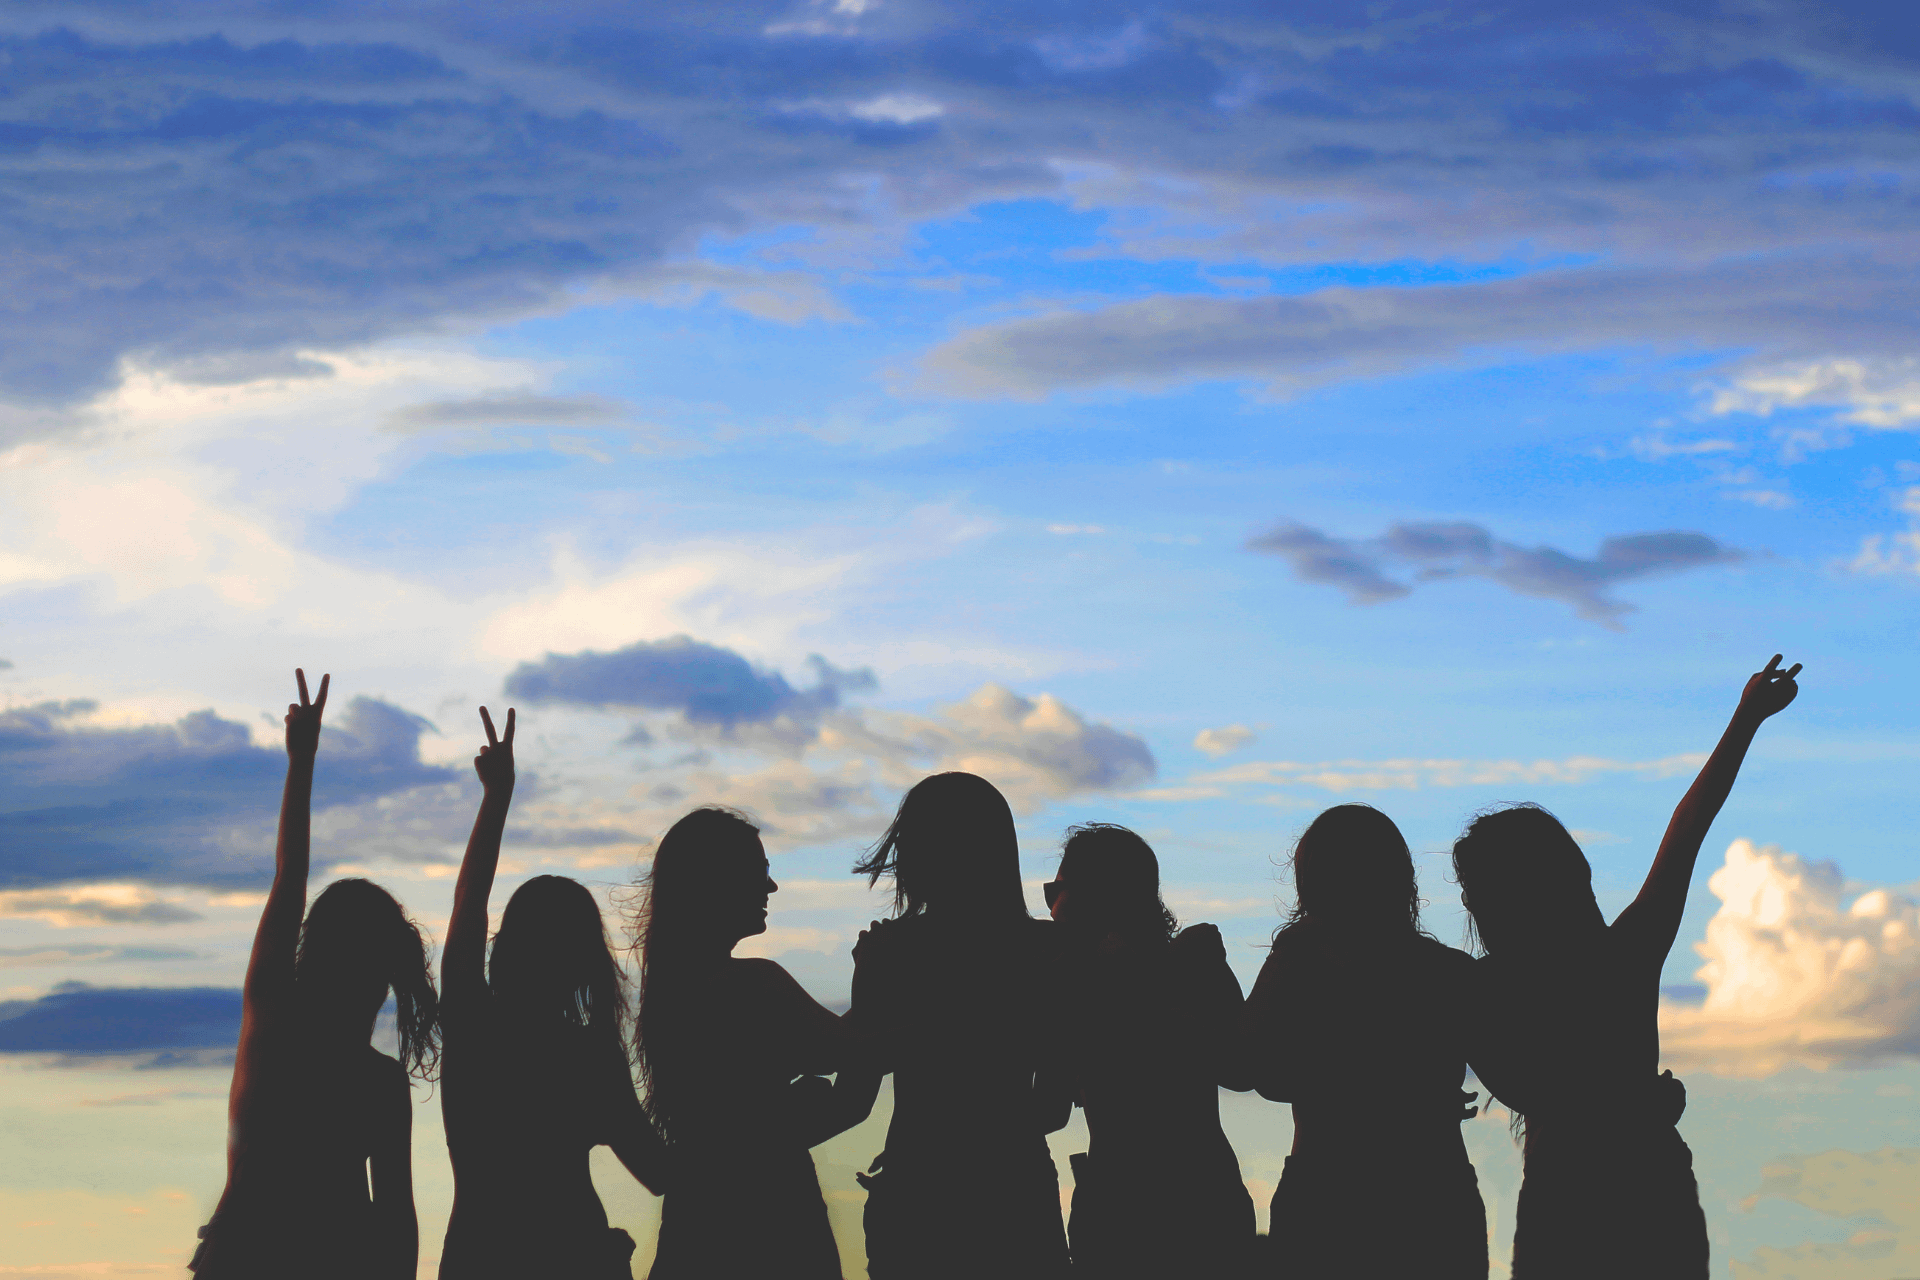 Group of women photo with shadows and beach sky behind them